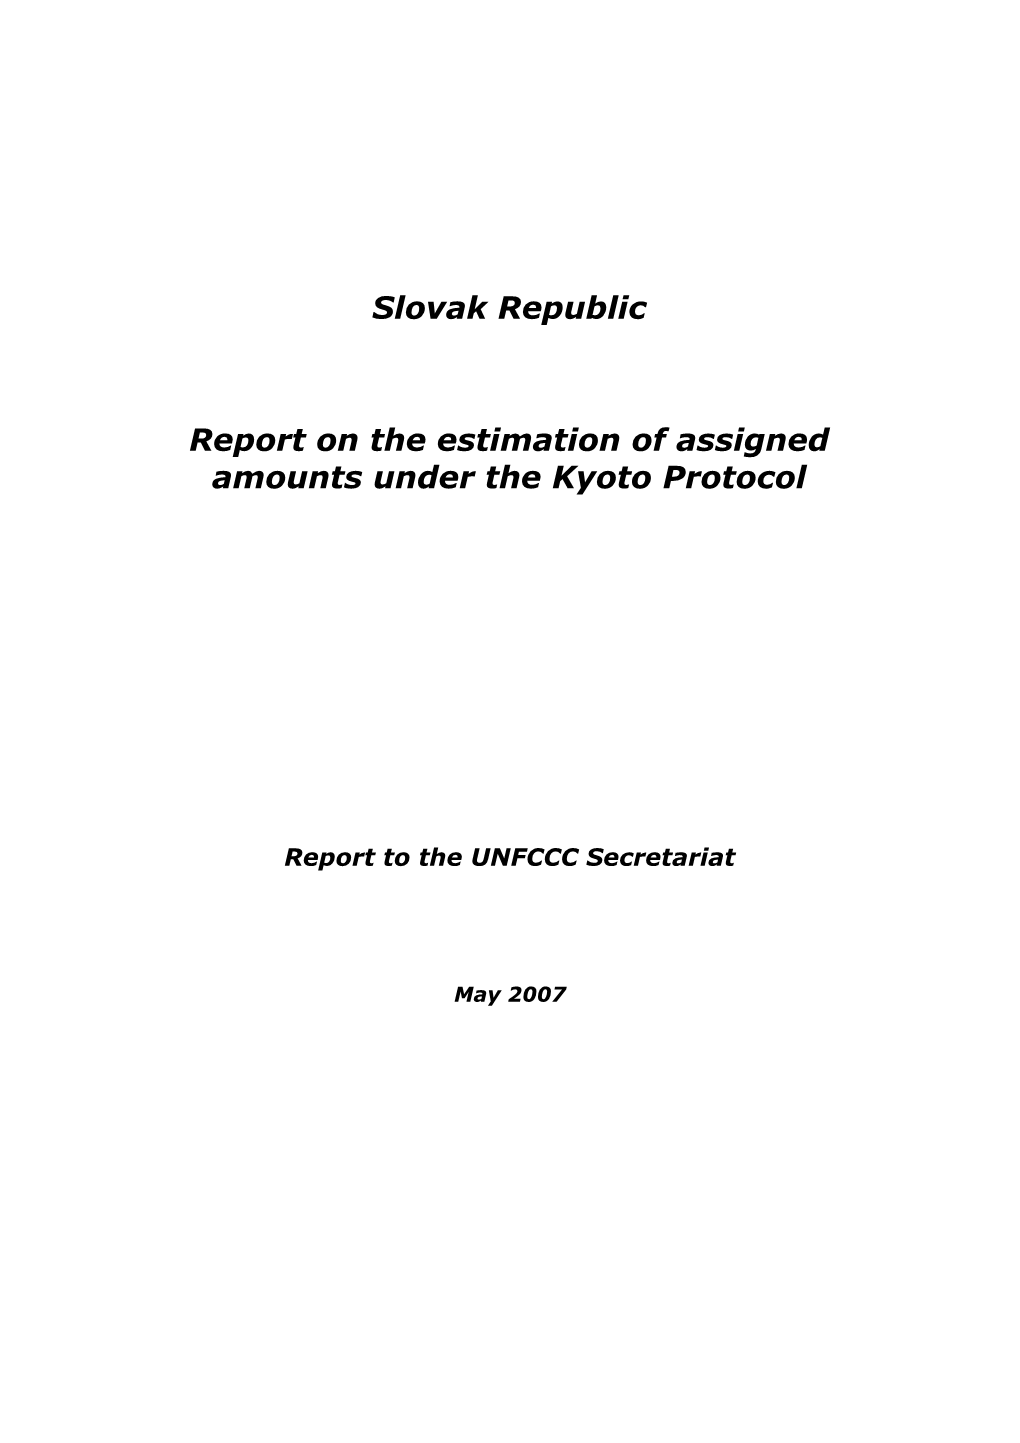 Report on the Estimation of Assigned Amounts Under the Kyoto Protocol